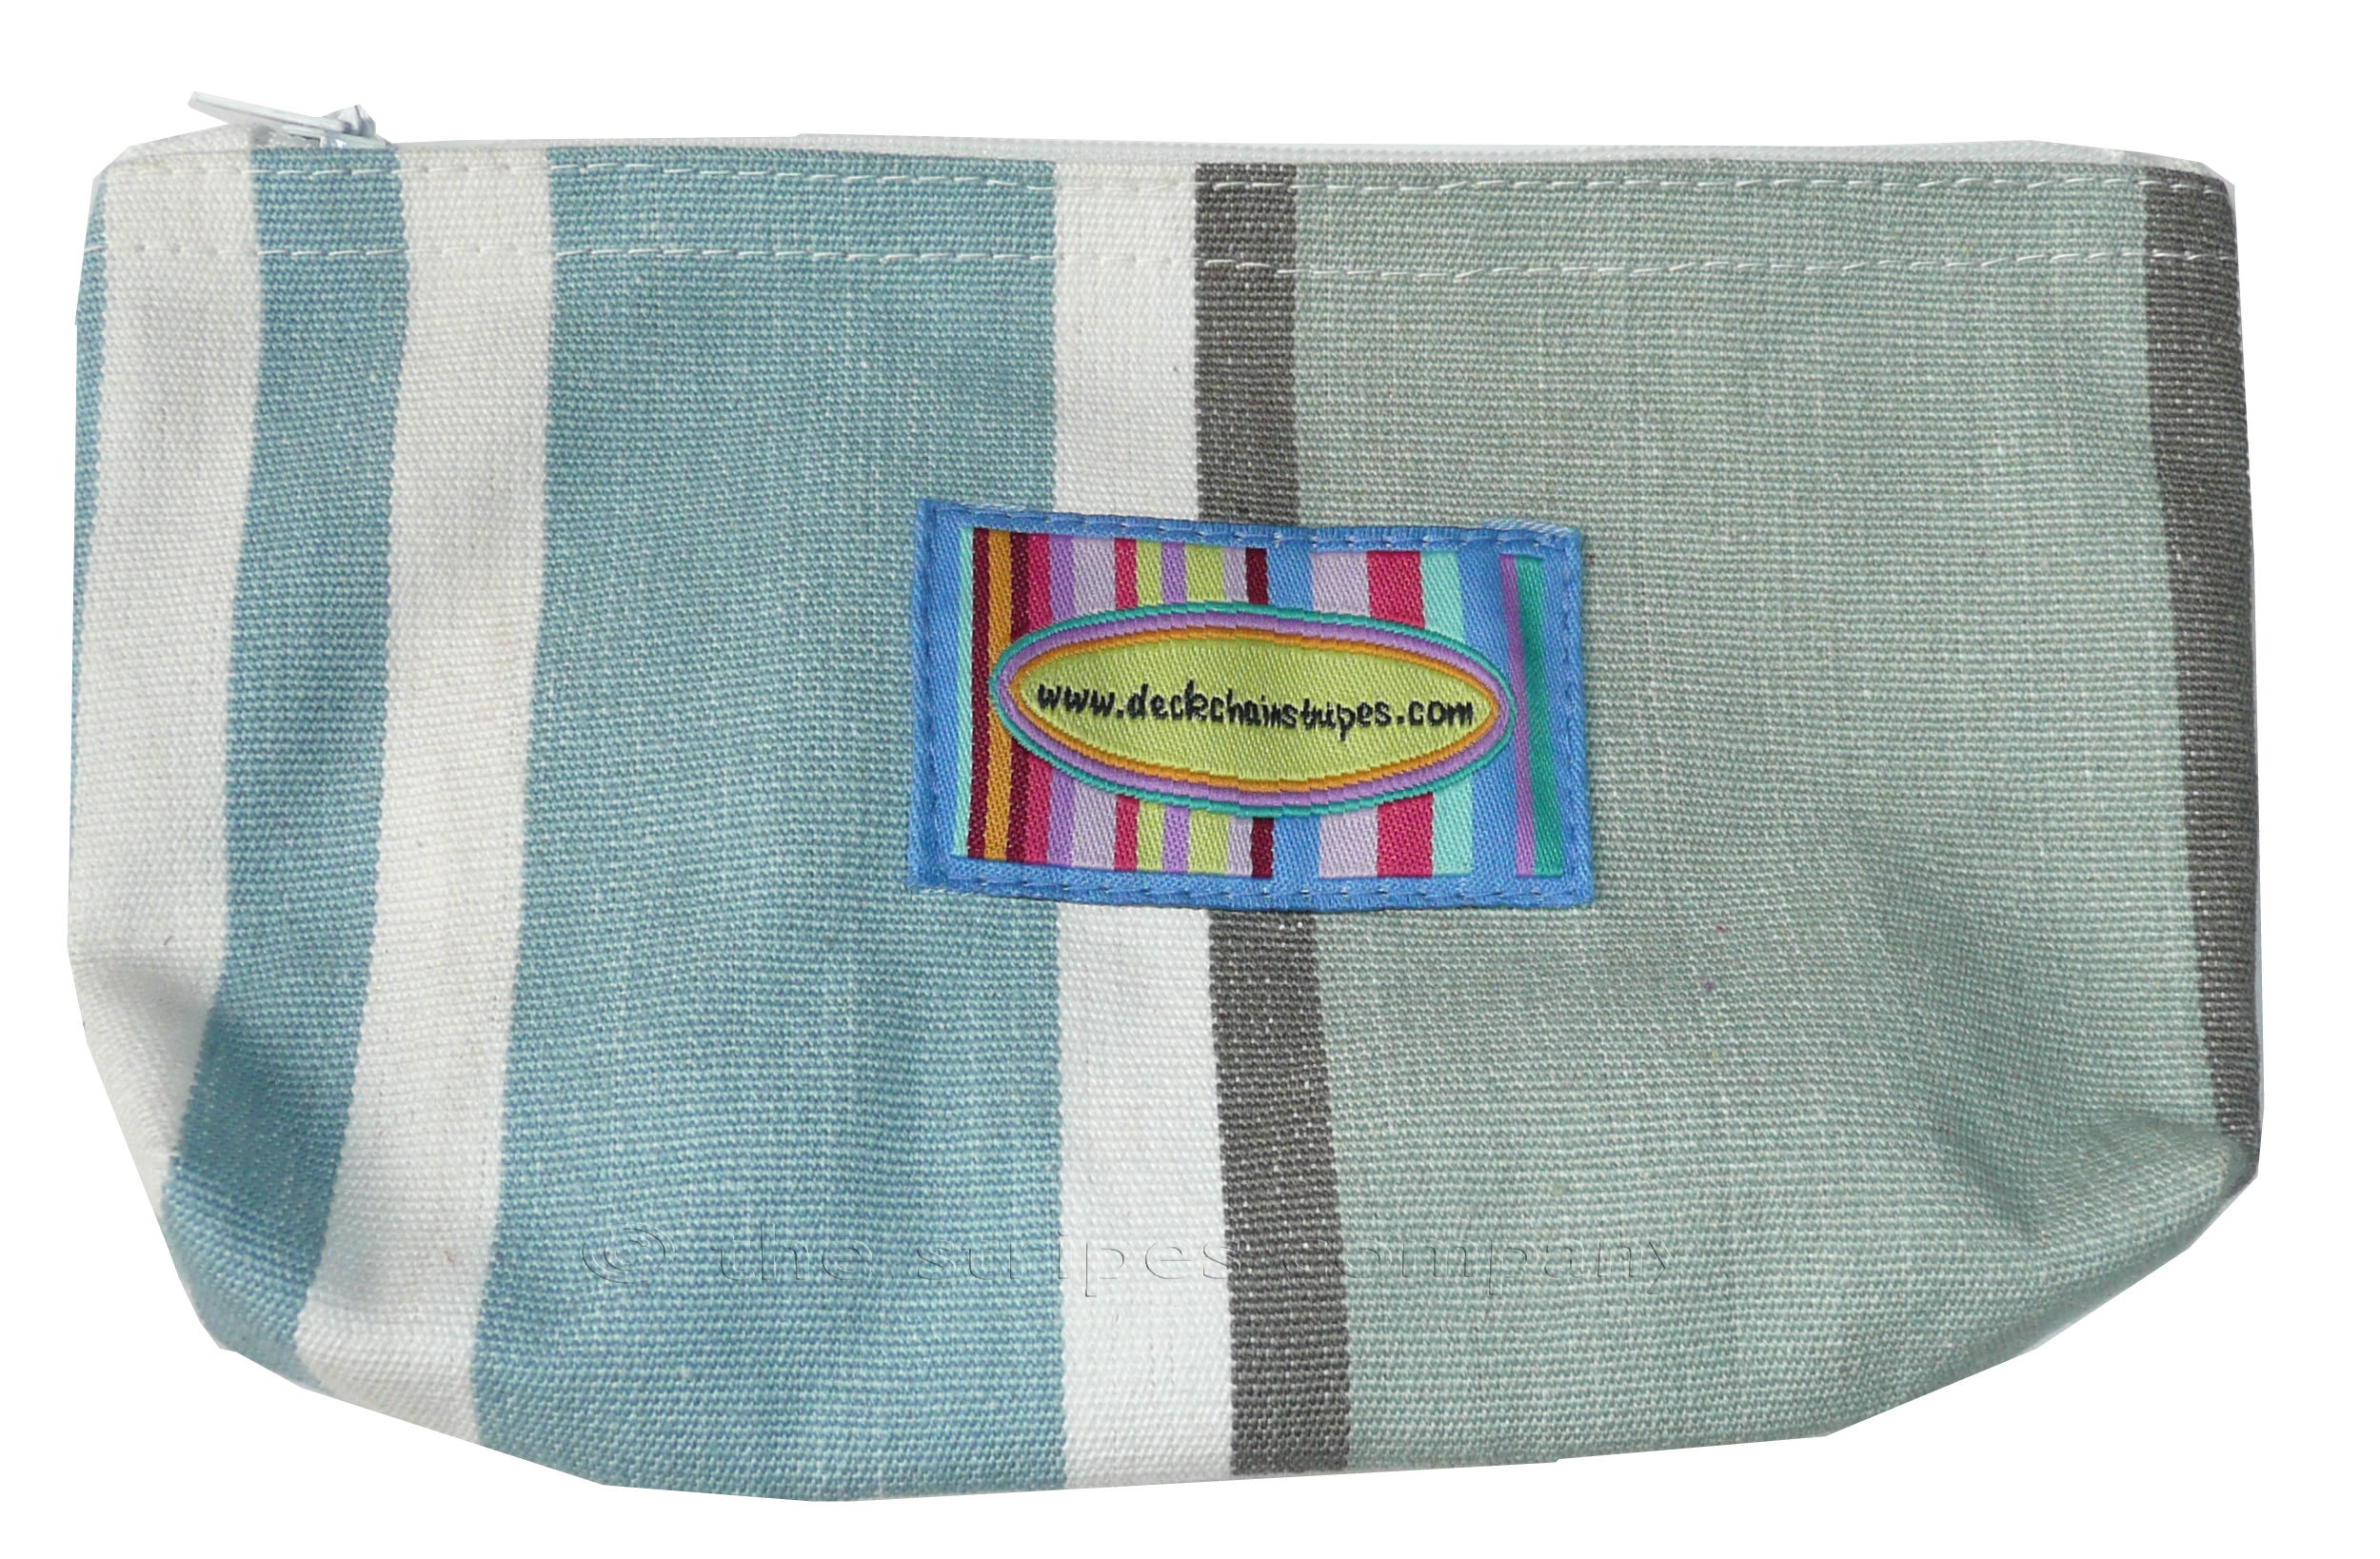 Teal Striped Purses | Small Zipped Bags | Cosmetic Bags Kendo Teal Stripes